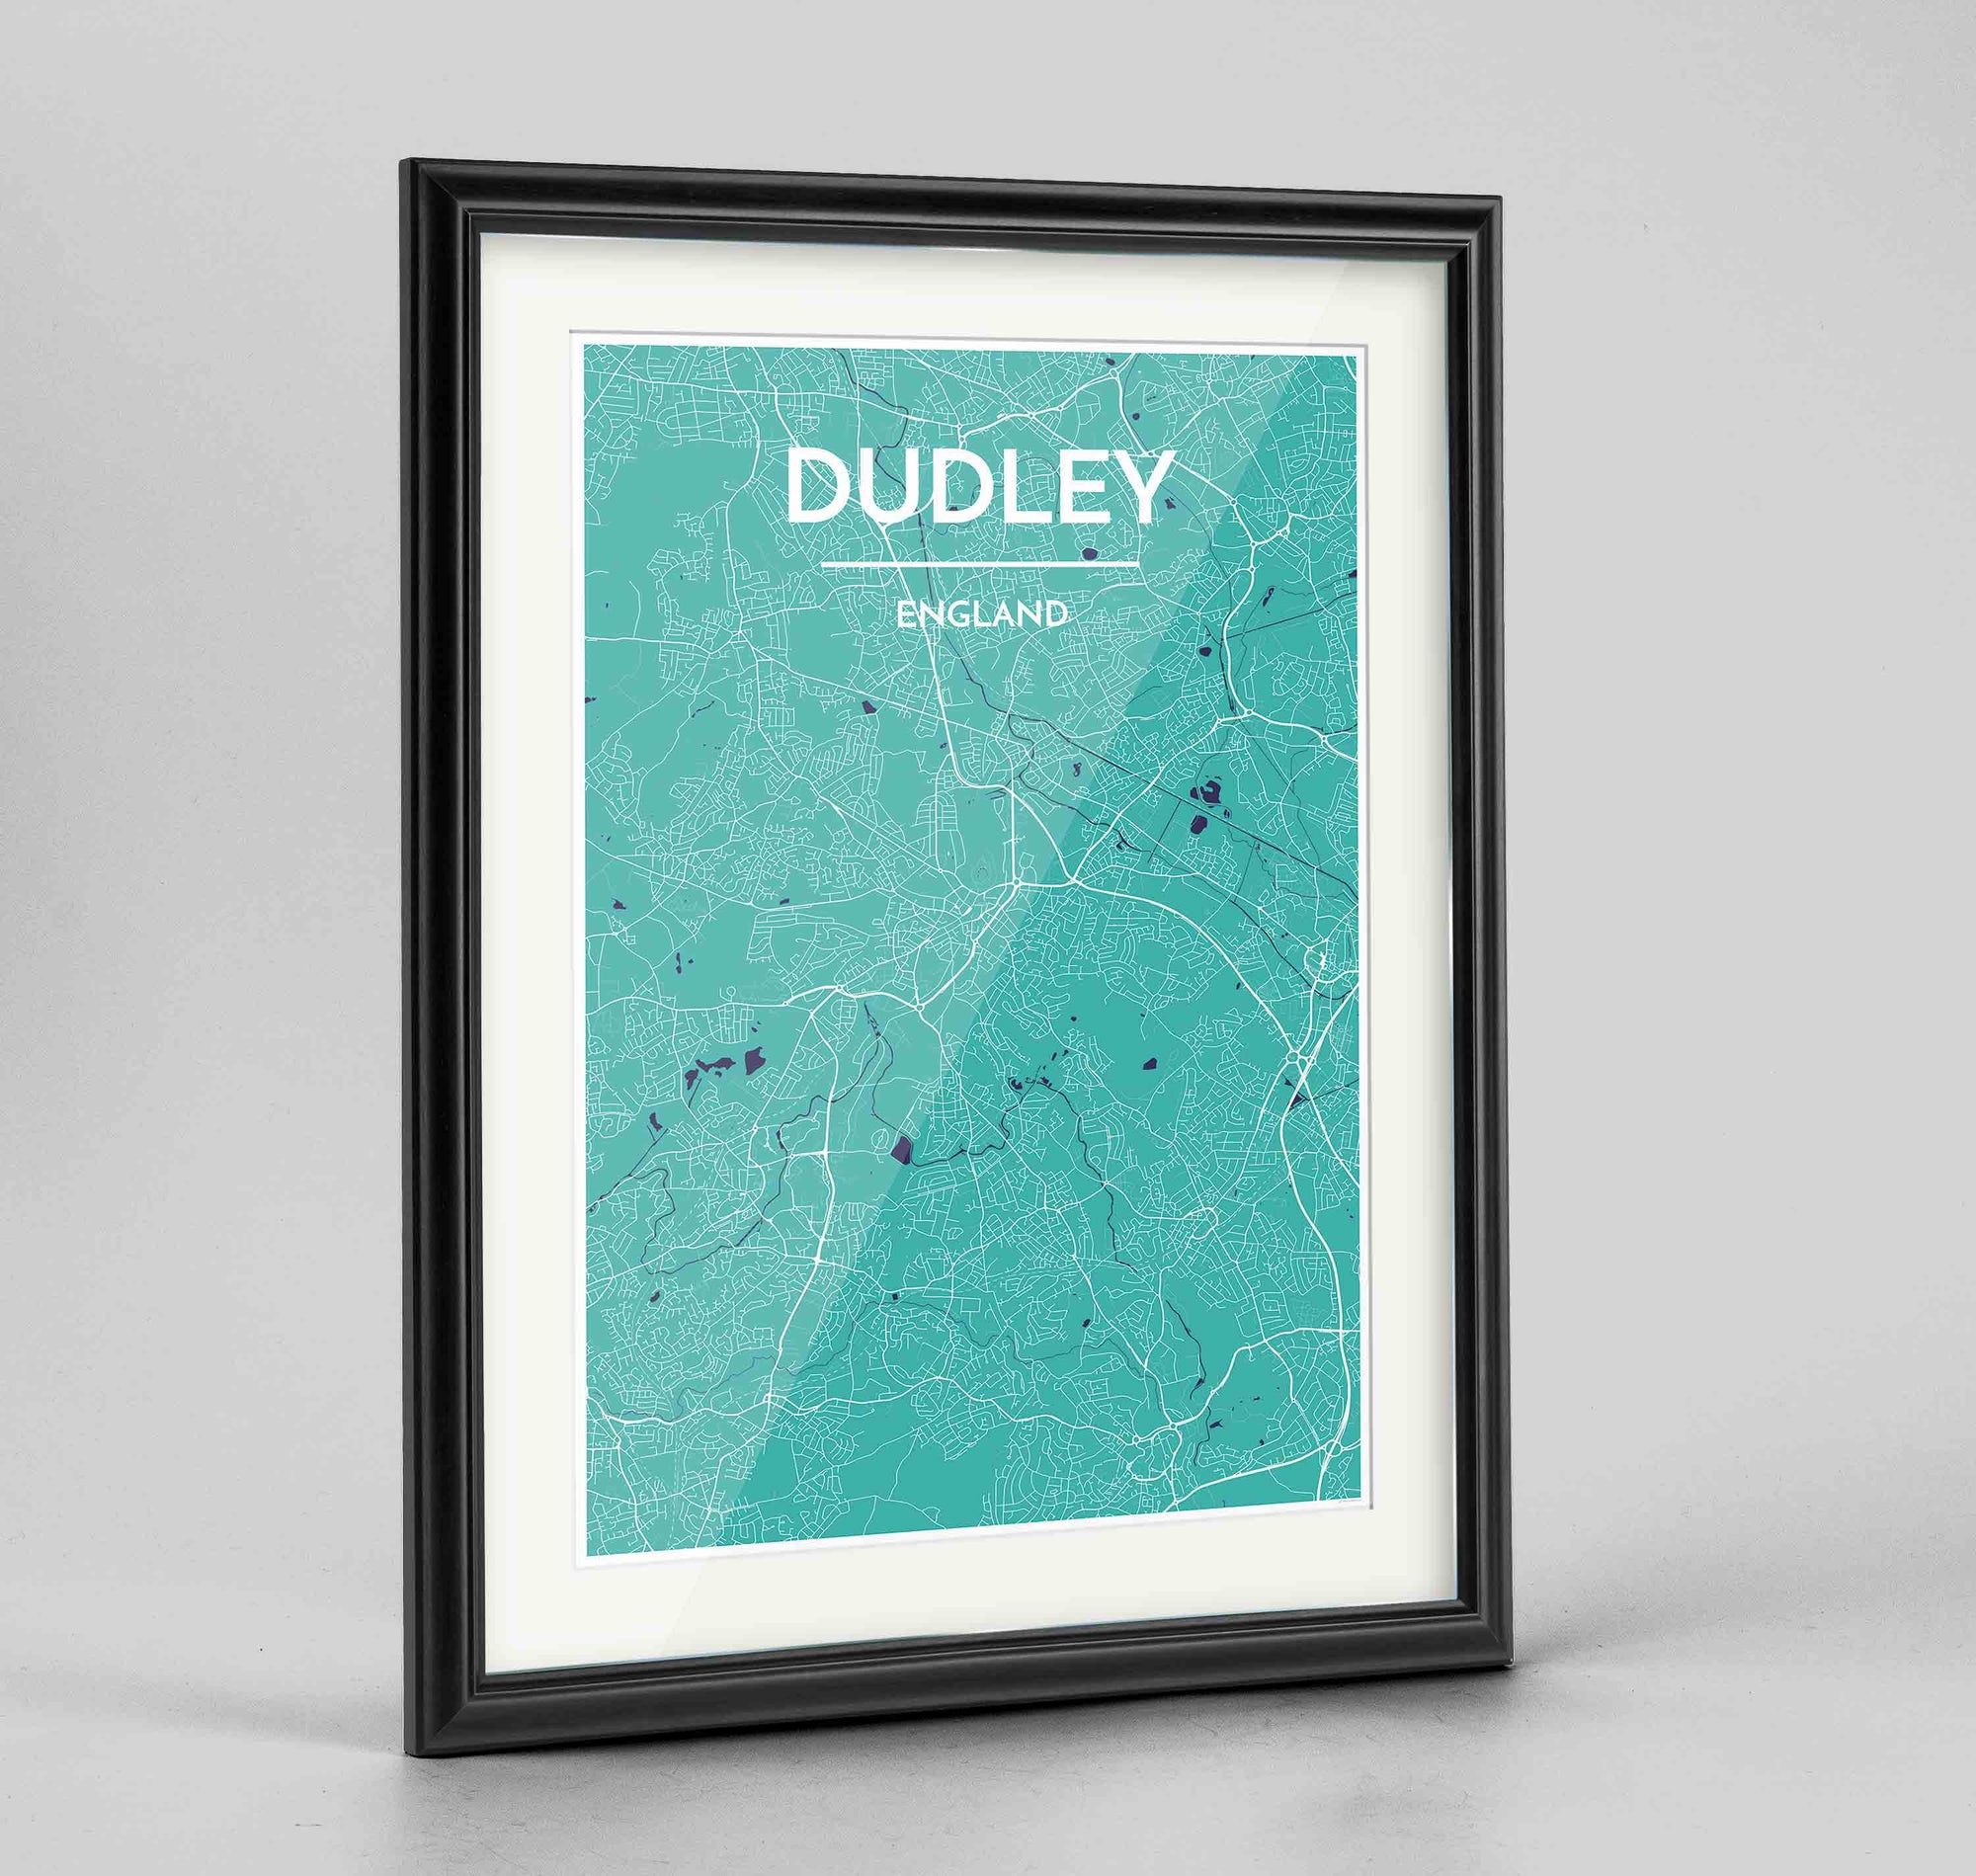 Framed Dudley Map Art Print 24x36" Traditional Black frame Point Two Design Group